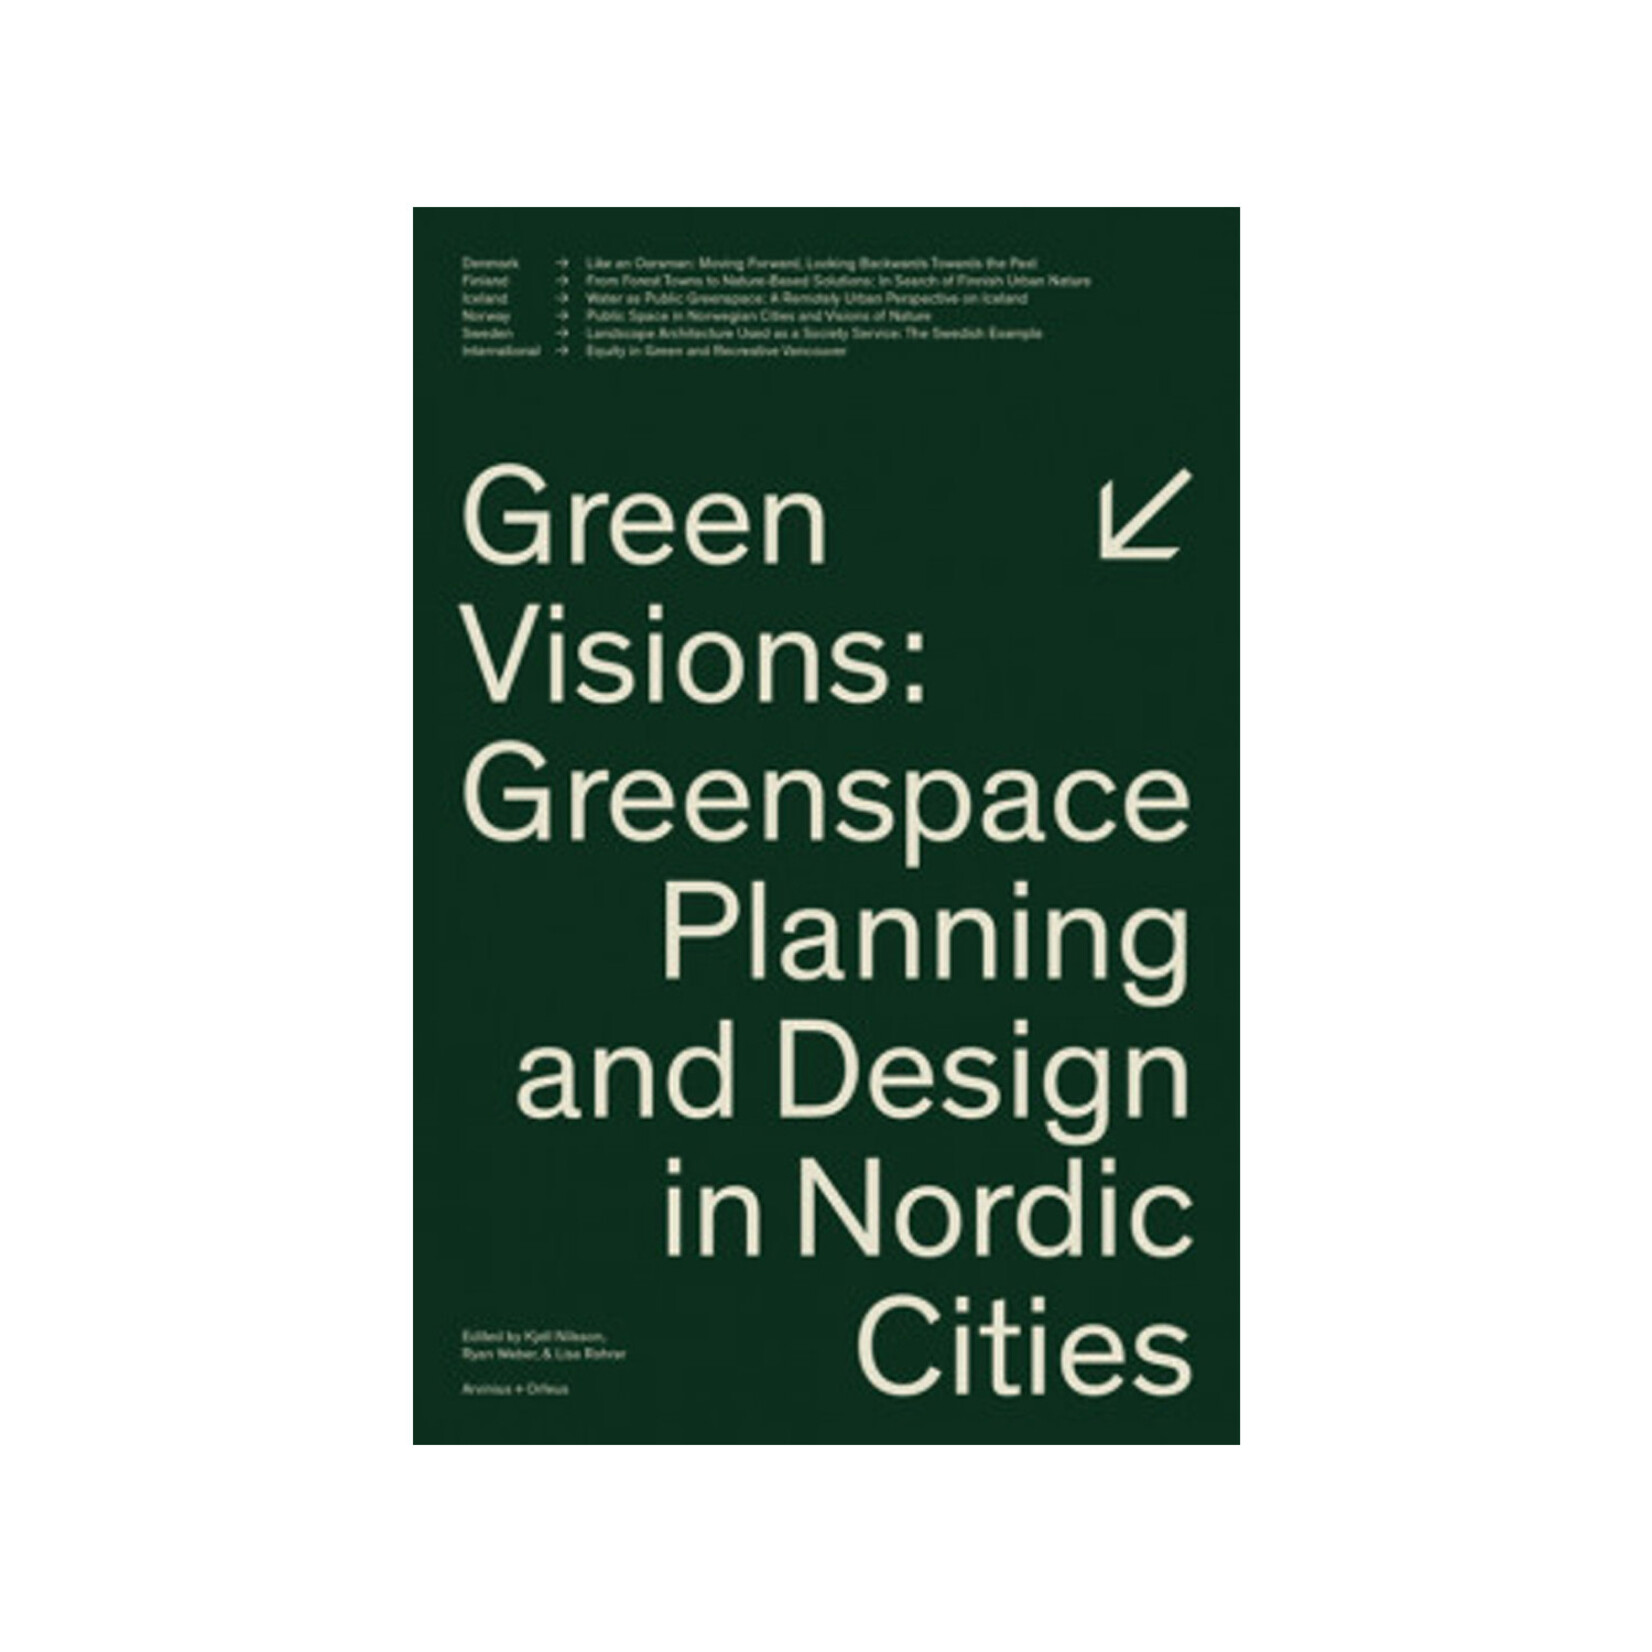 Green Visions: Greenspace Planning And Design In Nordic Cities